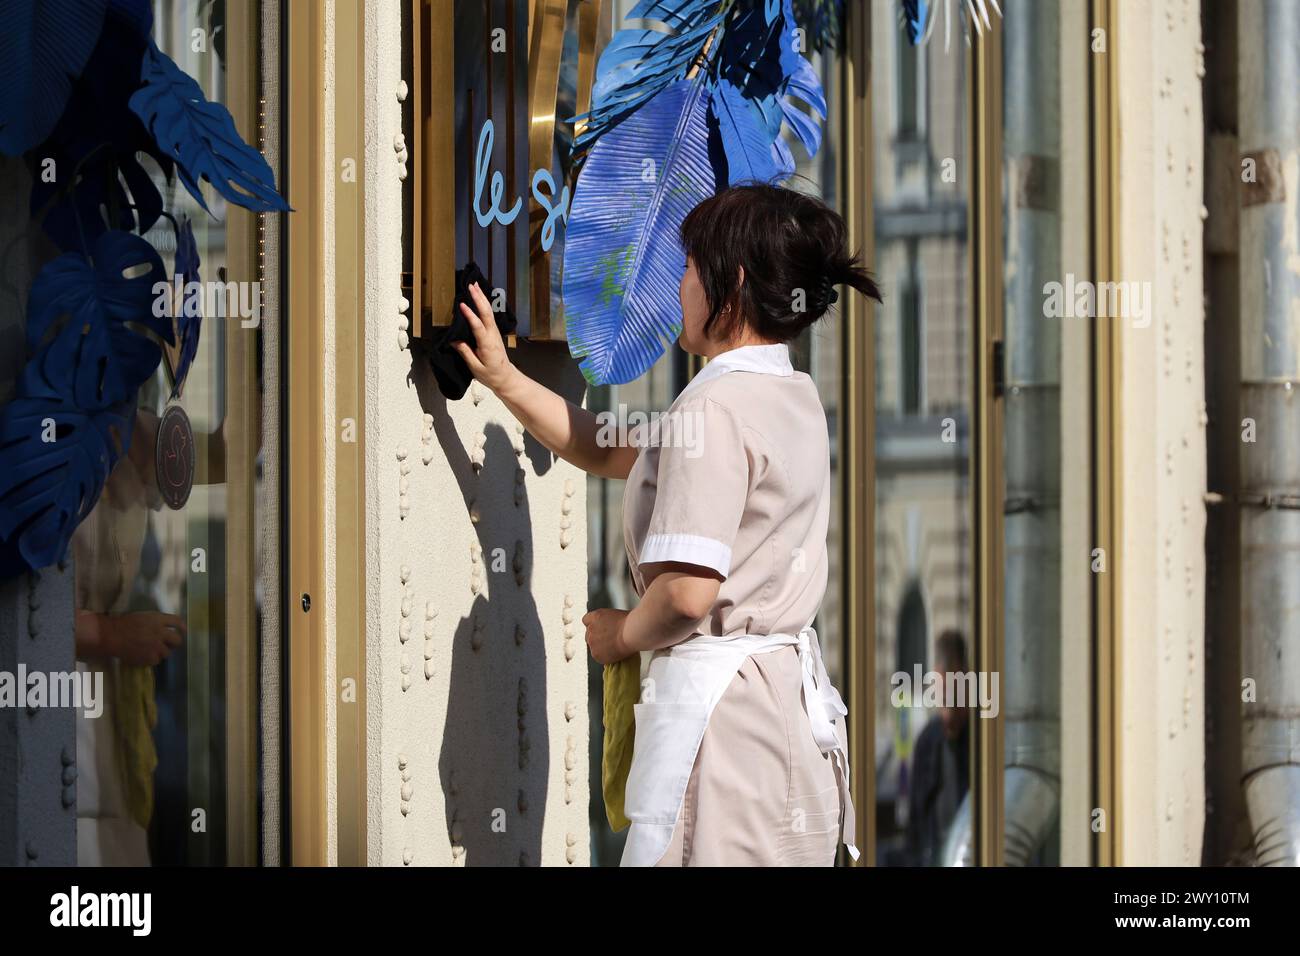 Cleaning in city, asian woman washing the restaurant facade Stock Photo